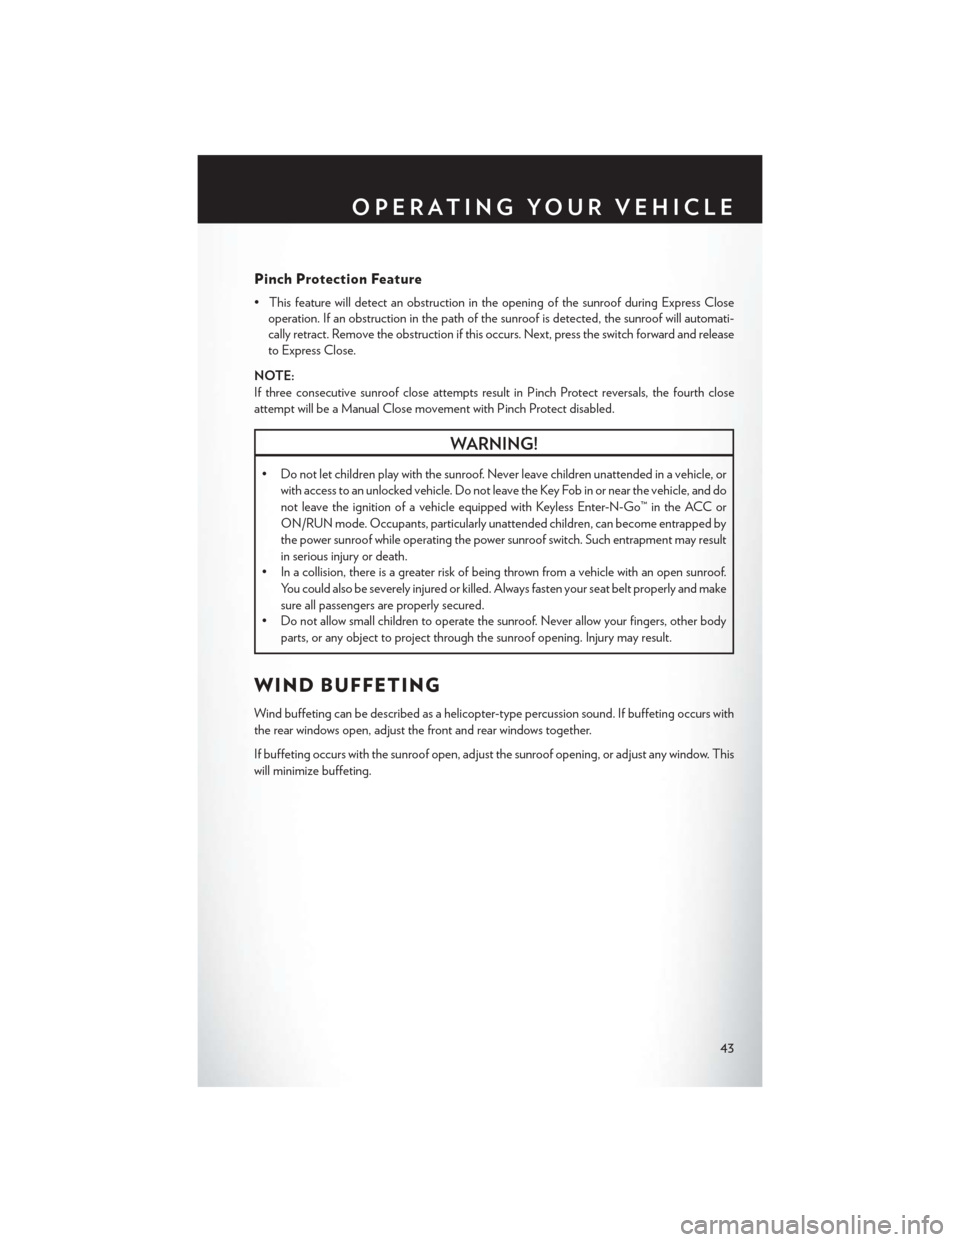 CHRYSLER TOWN AND COUNTRY 2014 5.G User Guide Pinch Protection Feature
• This feature will detect an obstruction in the opening of the sunroof during Express Closeoperation. If an obstruction in the path of the sunroof is detected, the sunroof 